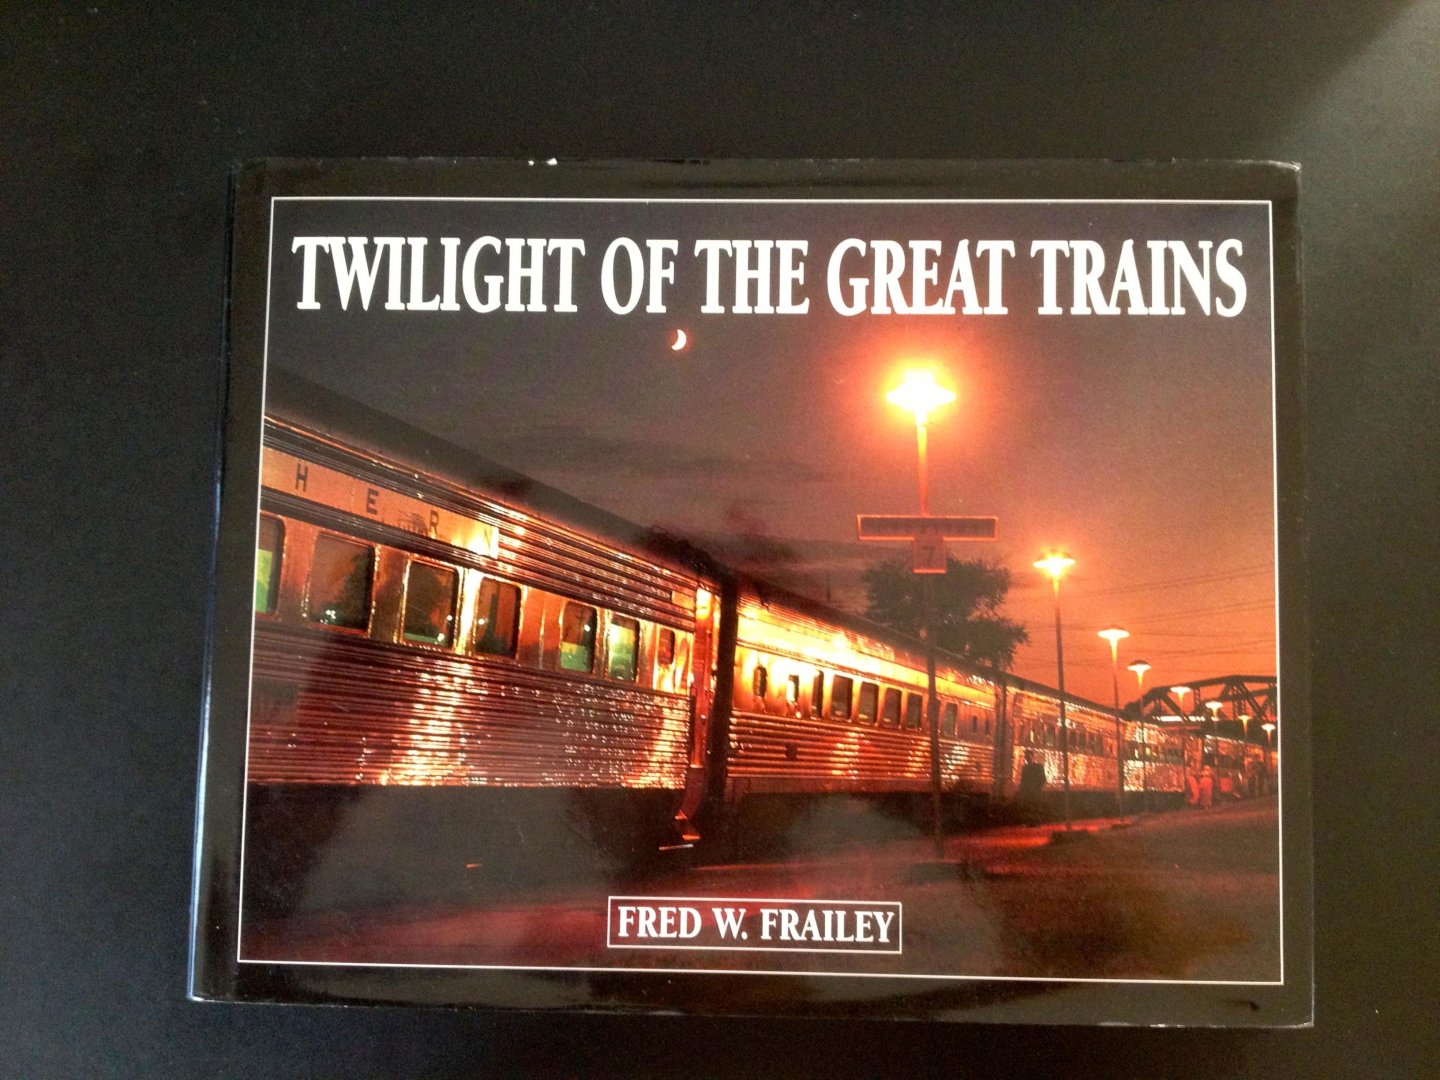 Frailey,Fred W. - Twilight of the great trains